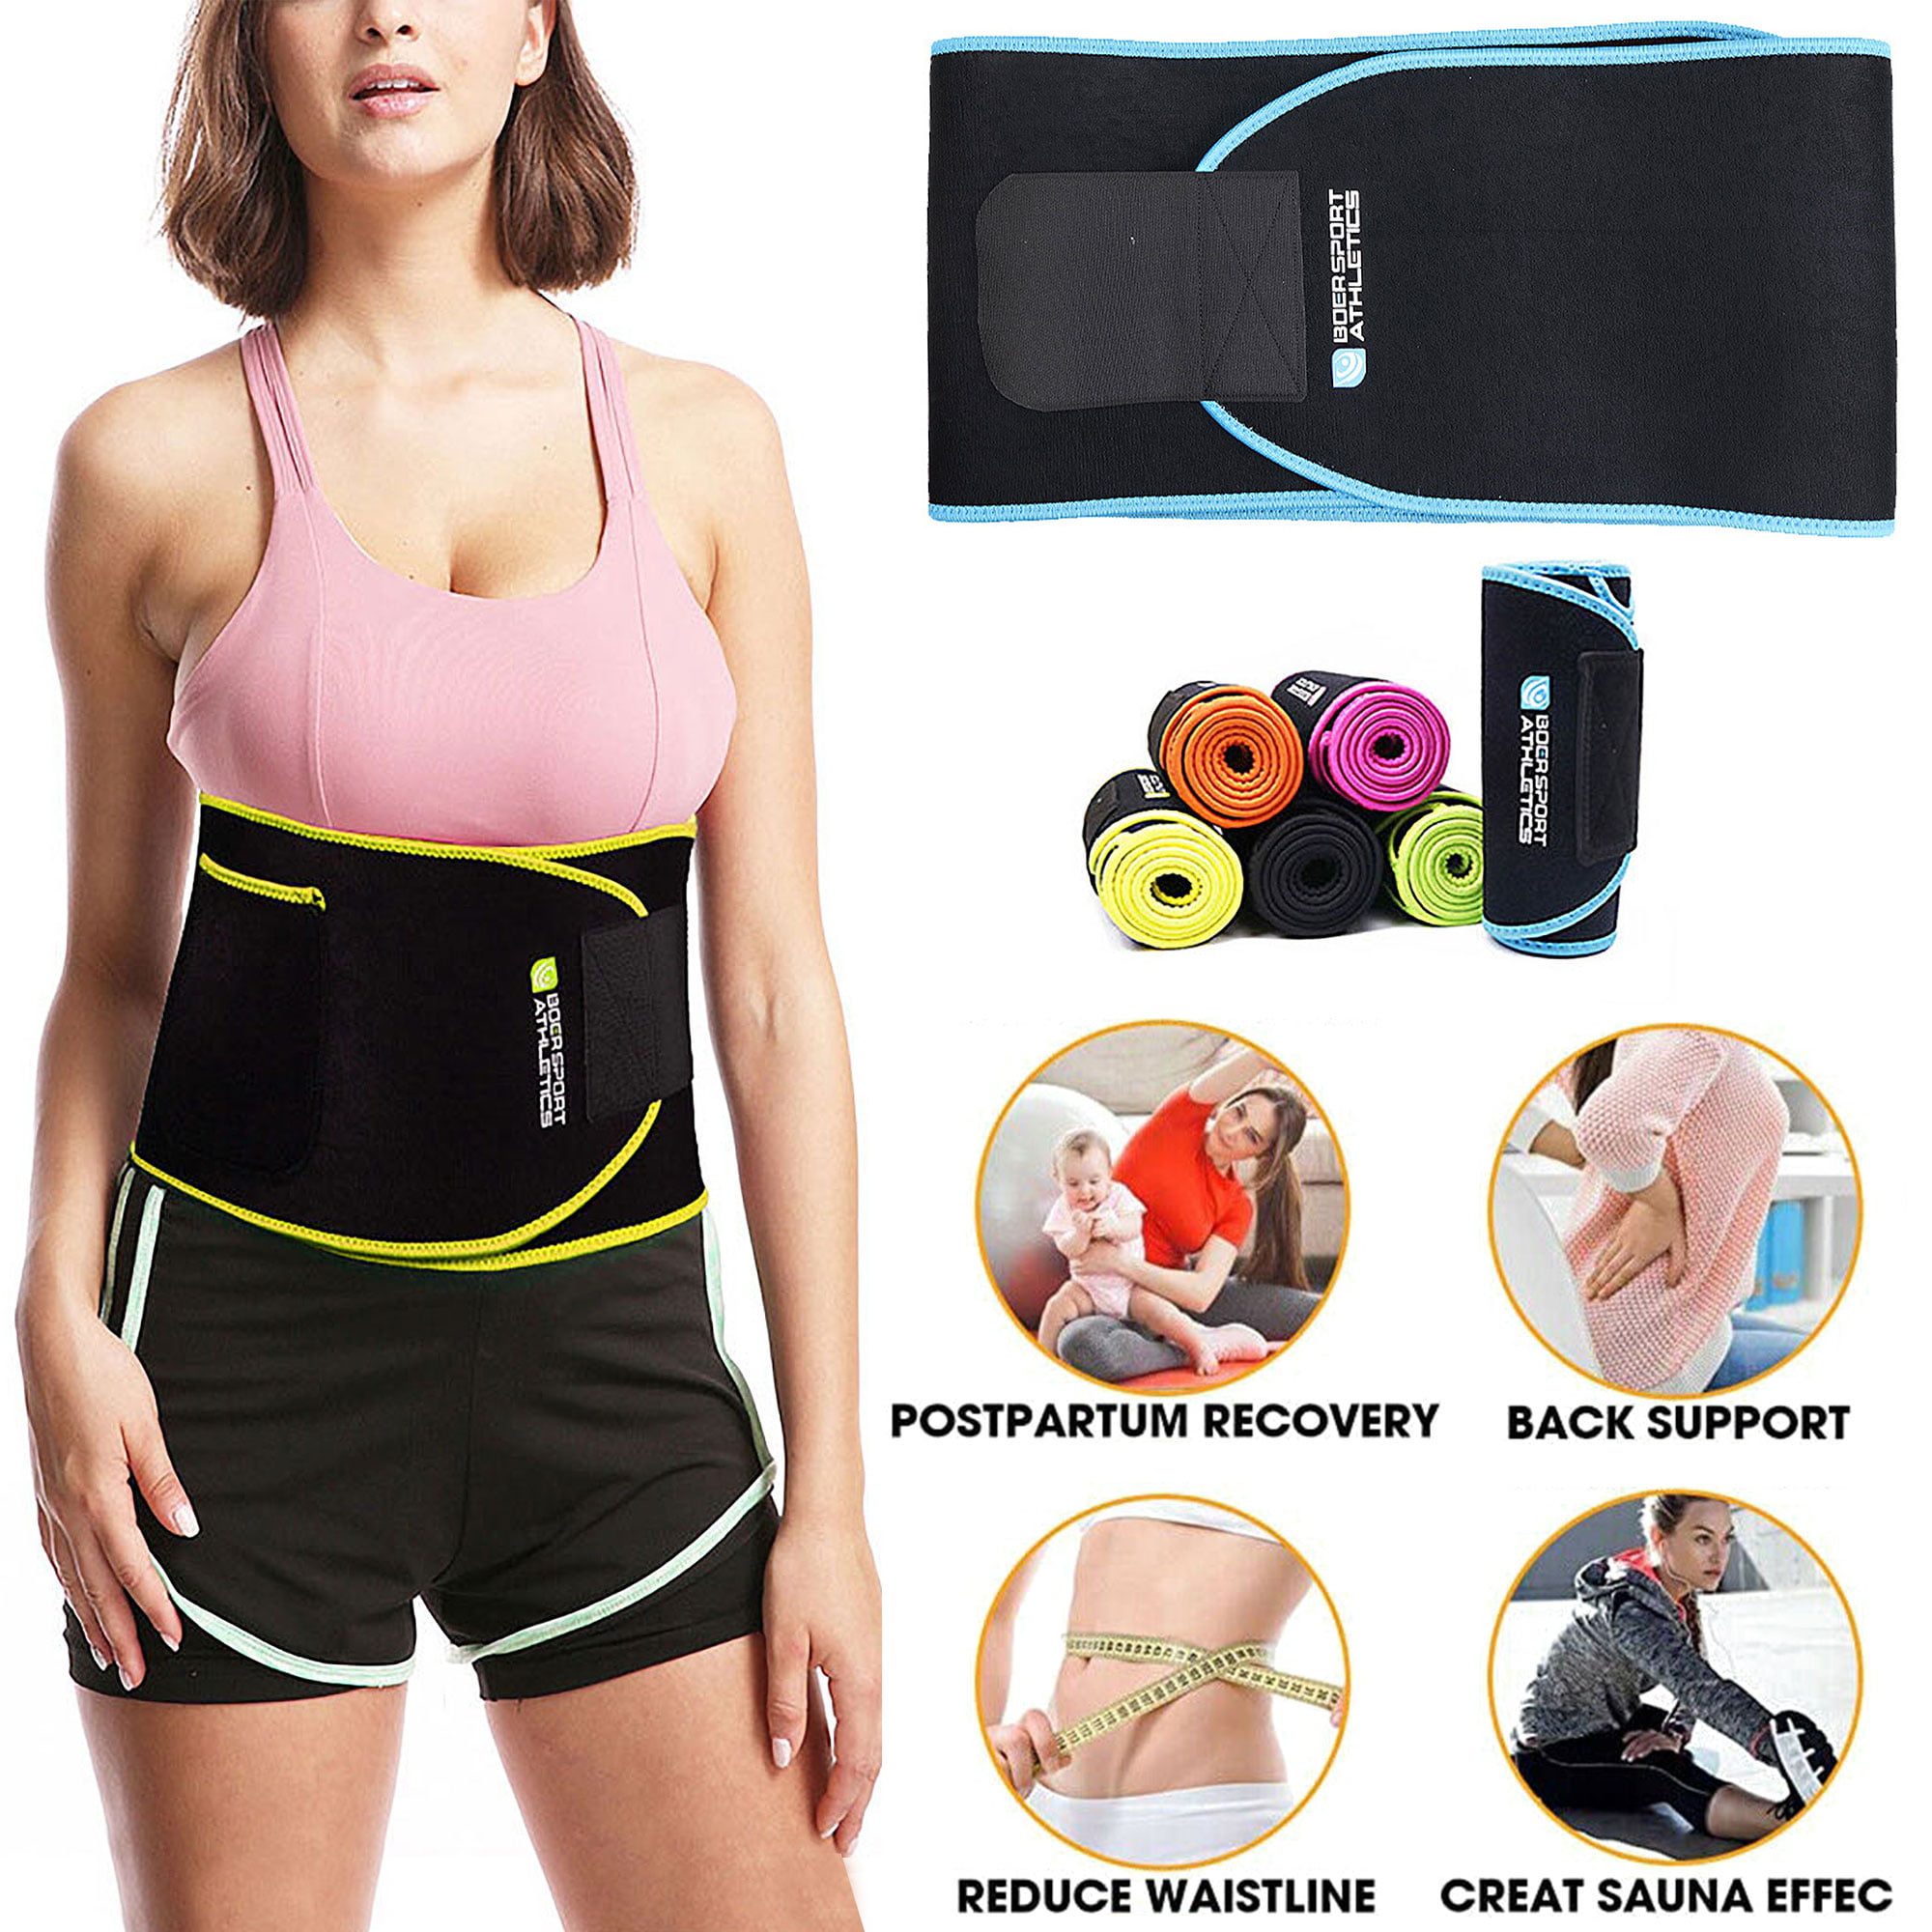 Details about   High Quality Spring Support Breathable Weightlifting Compression Waist Belt